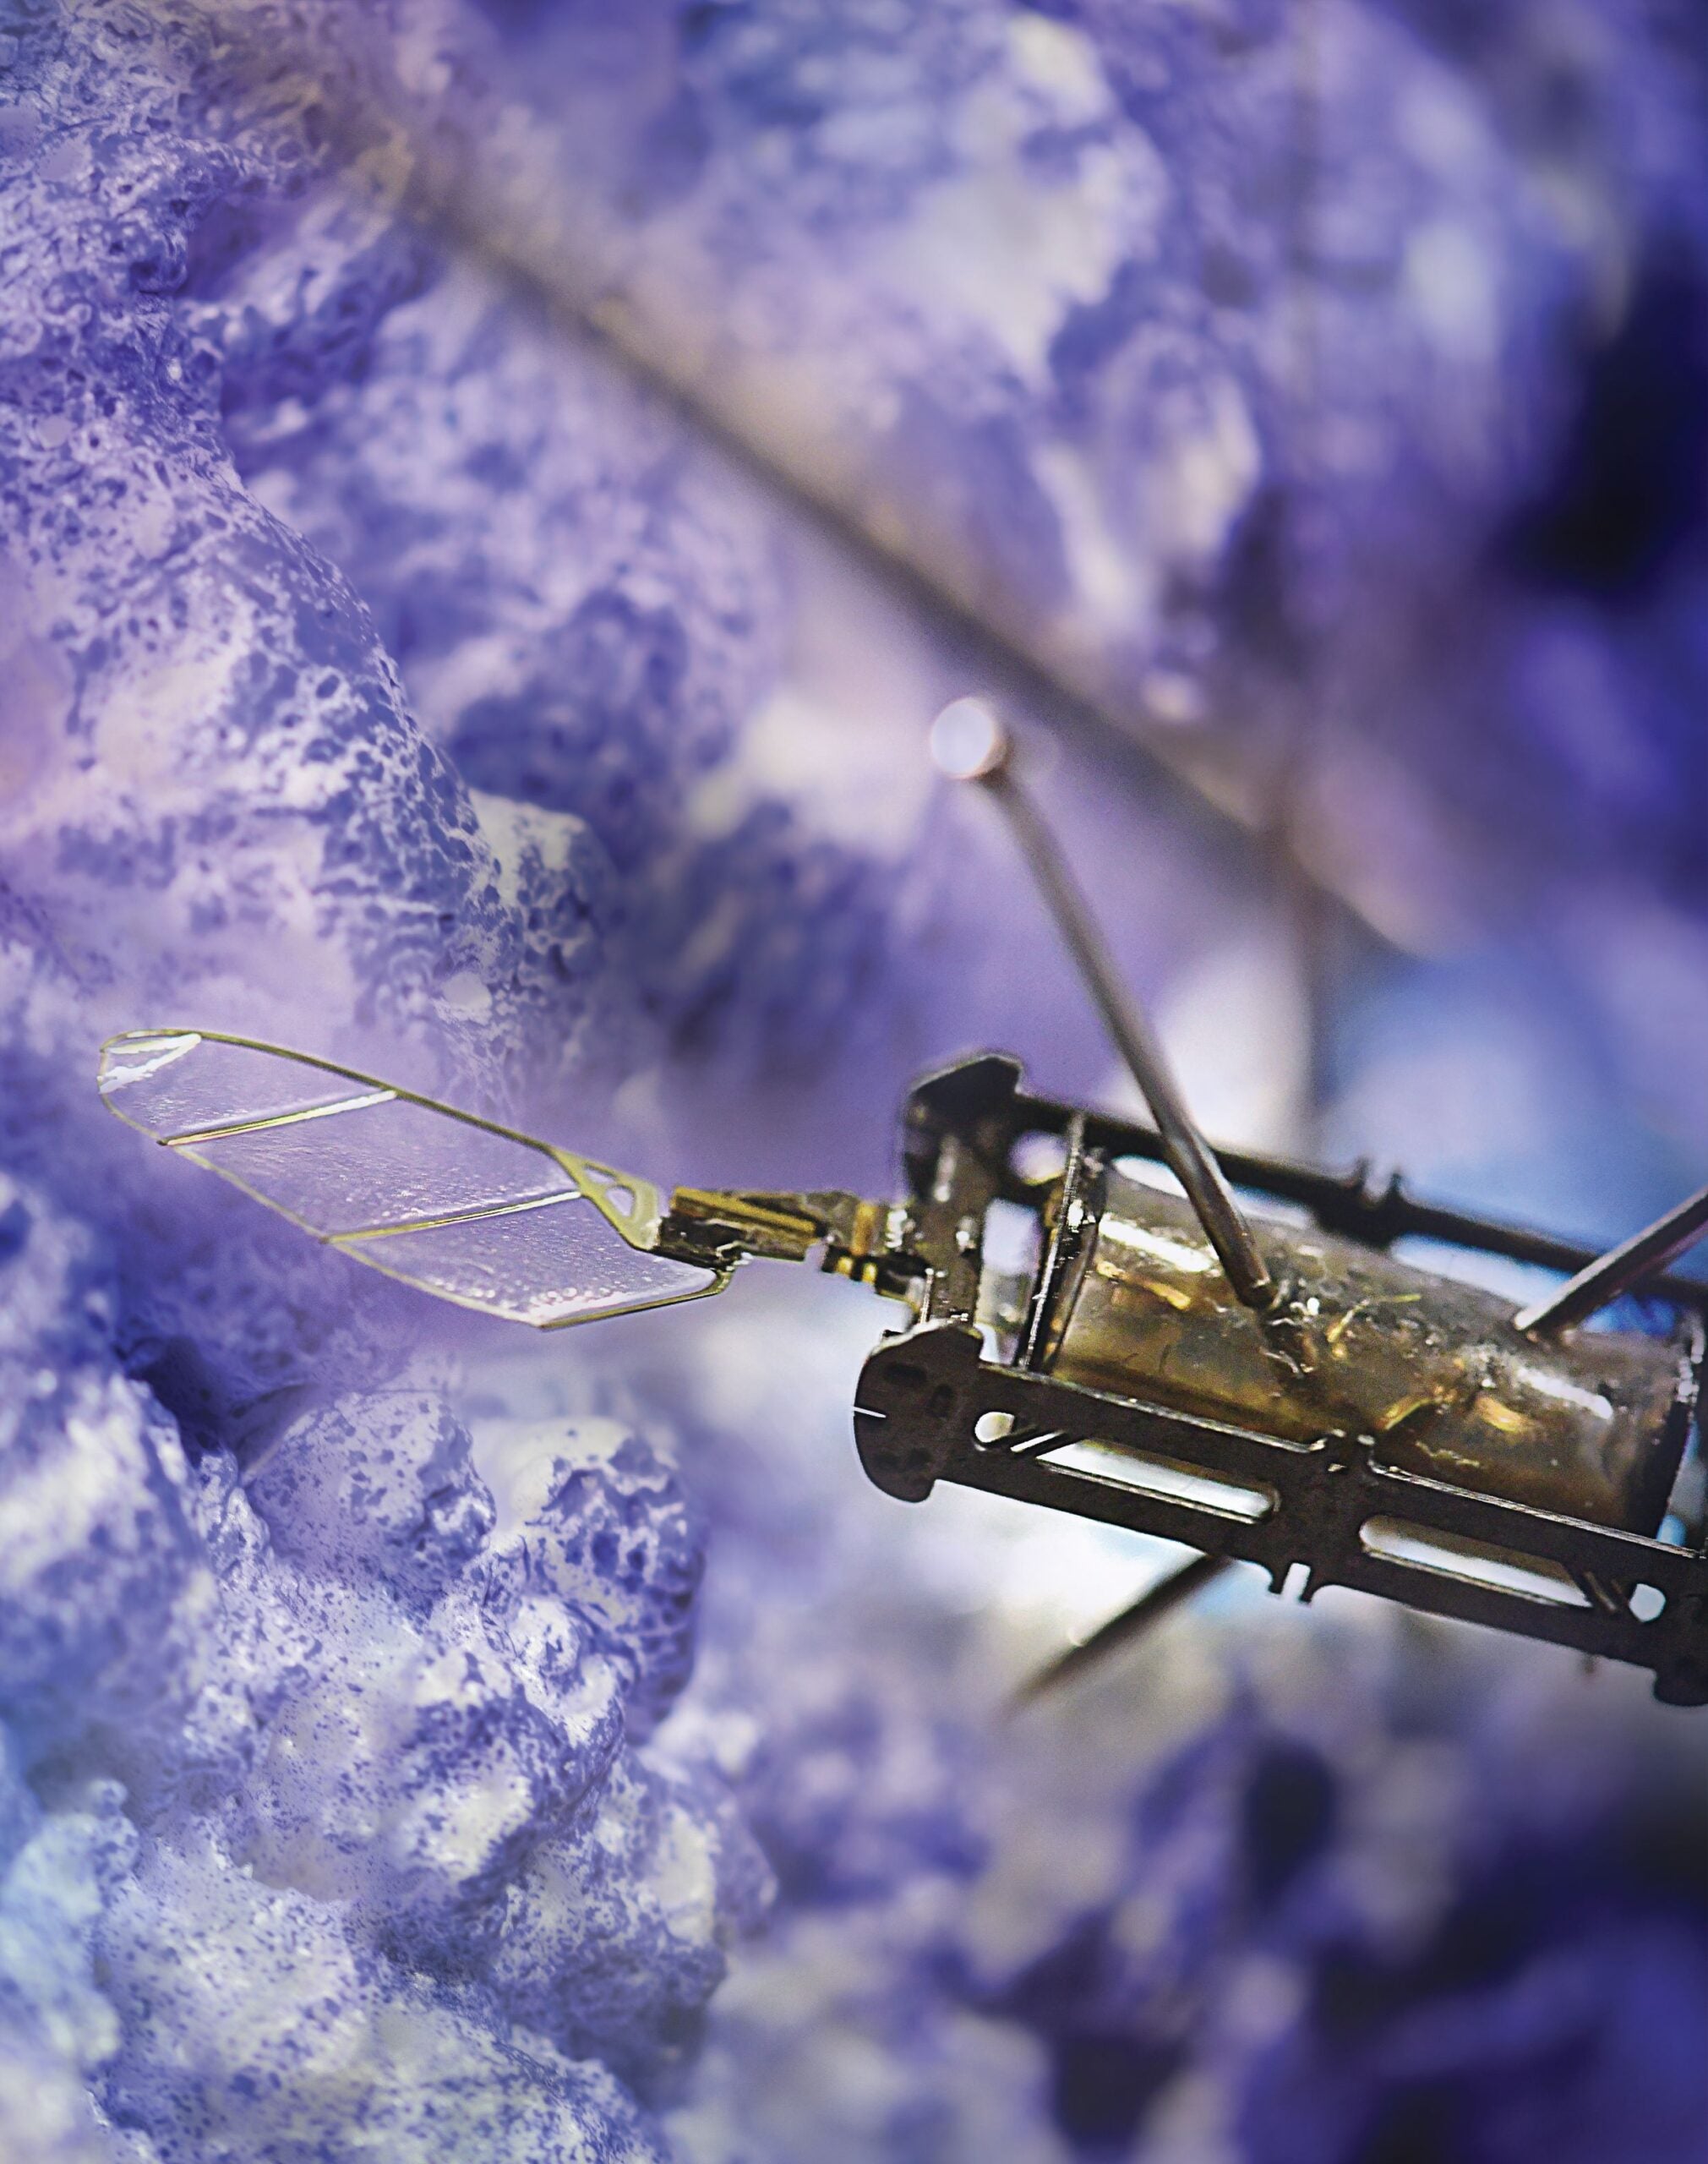 A robotic bee hovers over a purple background.